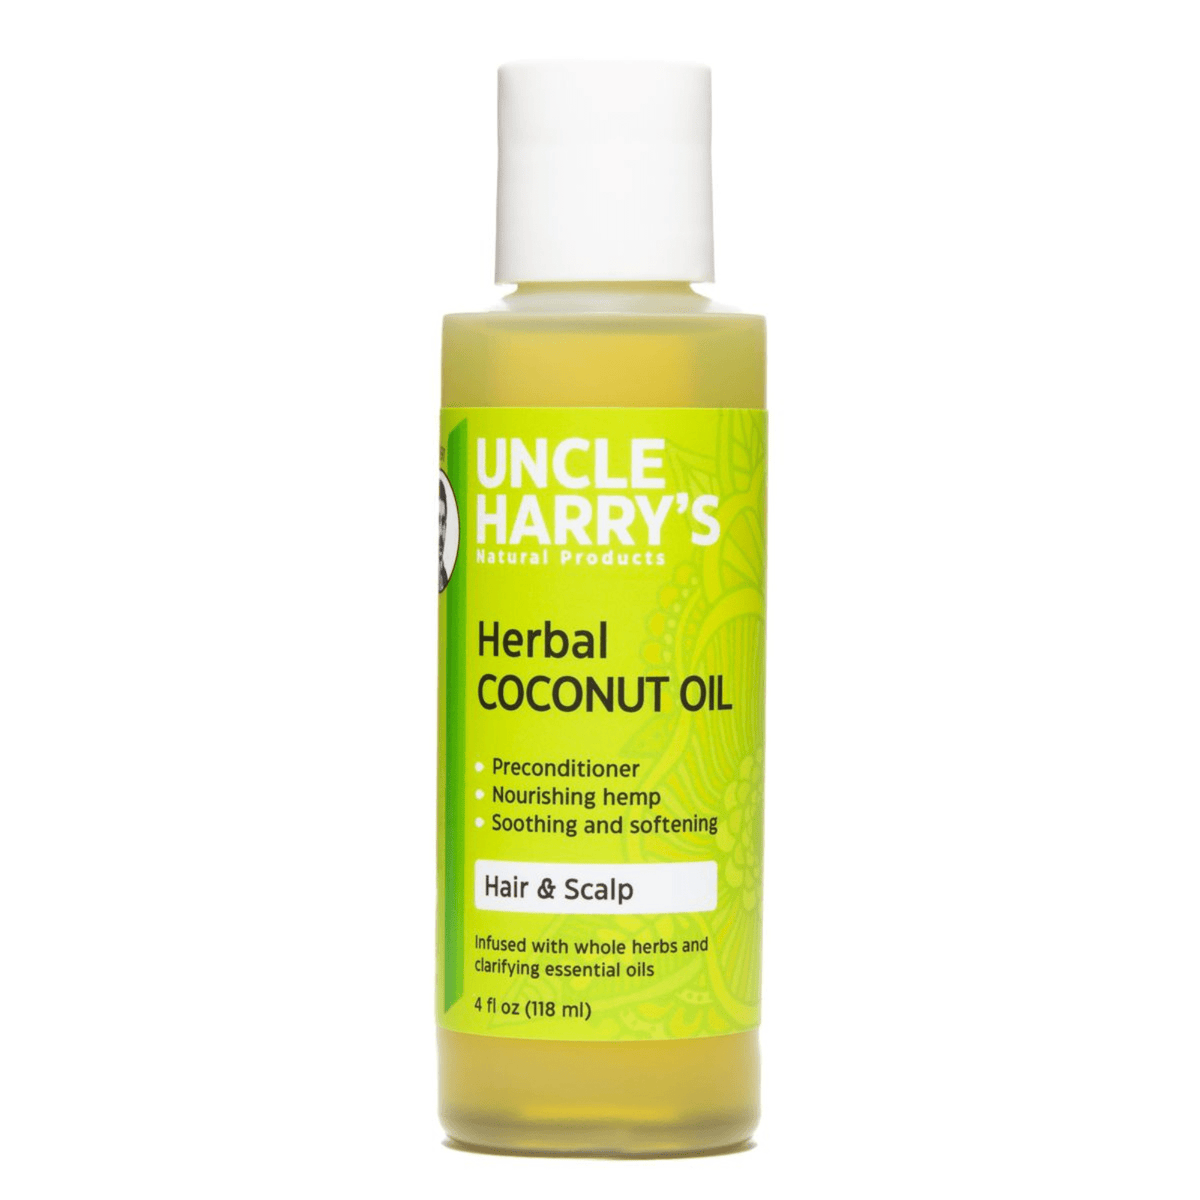 Primary Image of Herbal Coconut Oil for Hair & Scalp